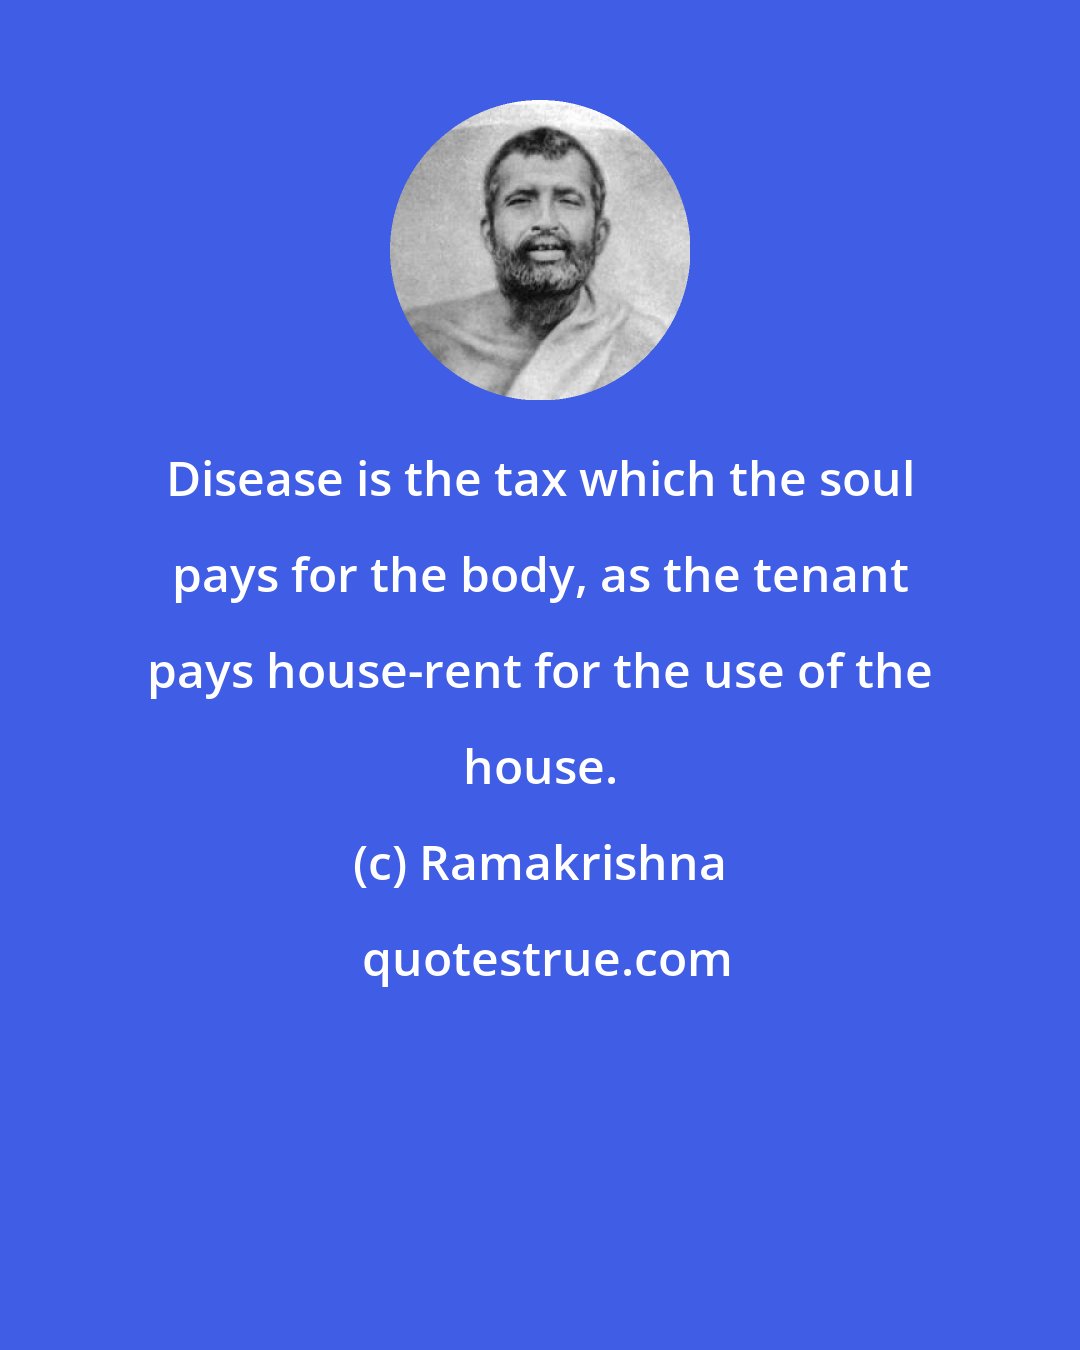 Ramakrishna: Disease is the tax which the soul pays for the body, as the tenant pays house-rent for the use of the house.